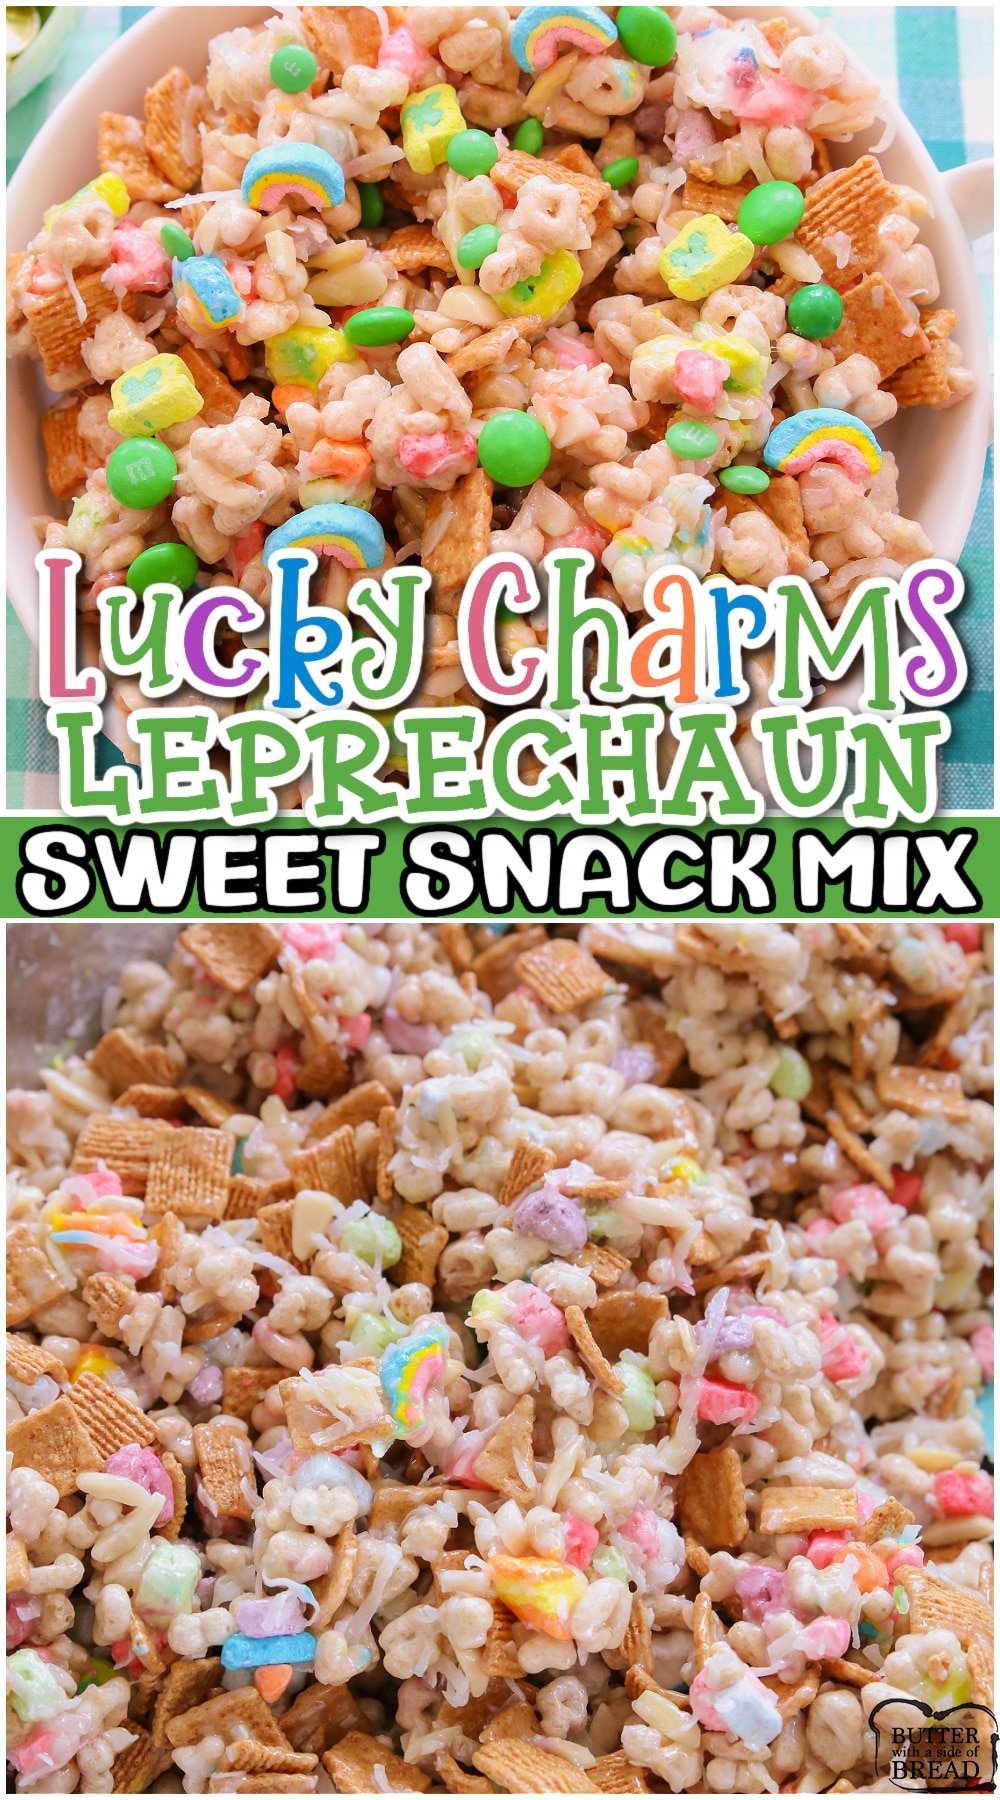 Lucky Charms Leprechaun Snack Mix is a fun twist on a classic perfect for St. Patrick's Day! Lucky Charms cereal, coconut, almonds & M&M's combine in a fun & festive sweet snack mix. 